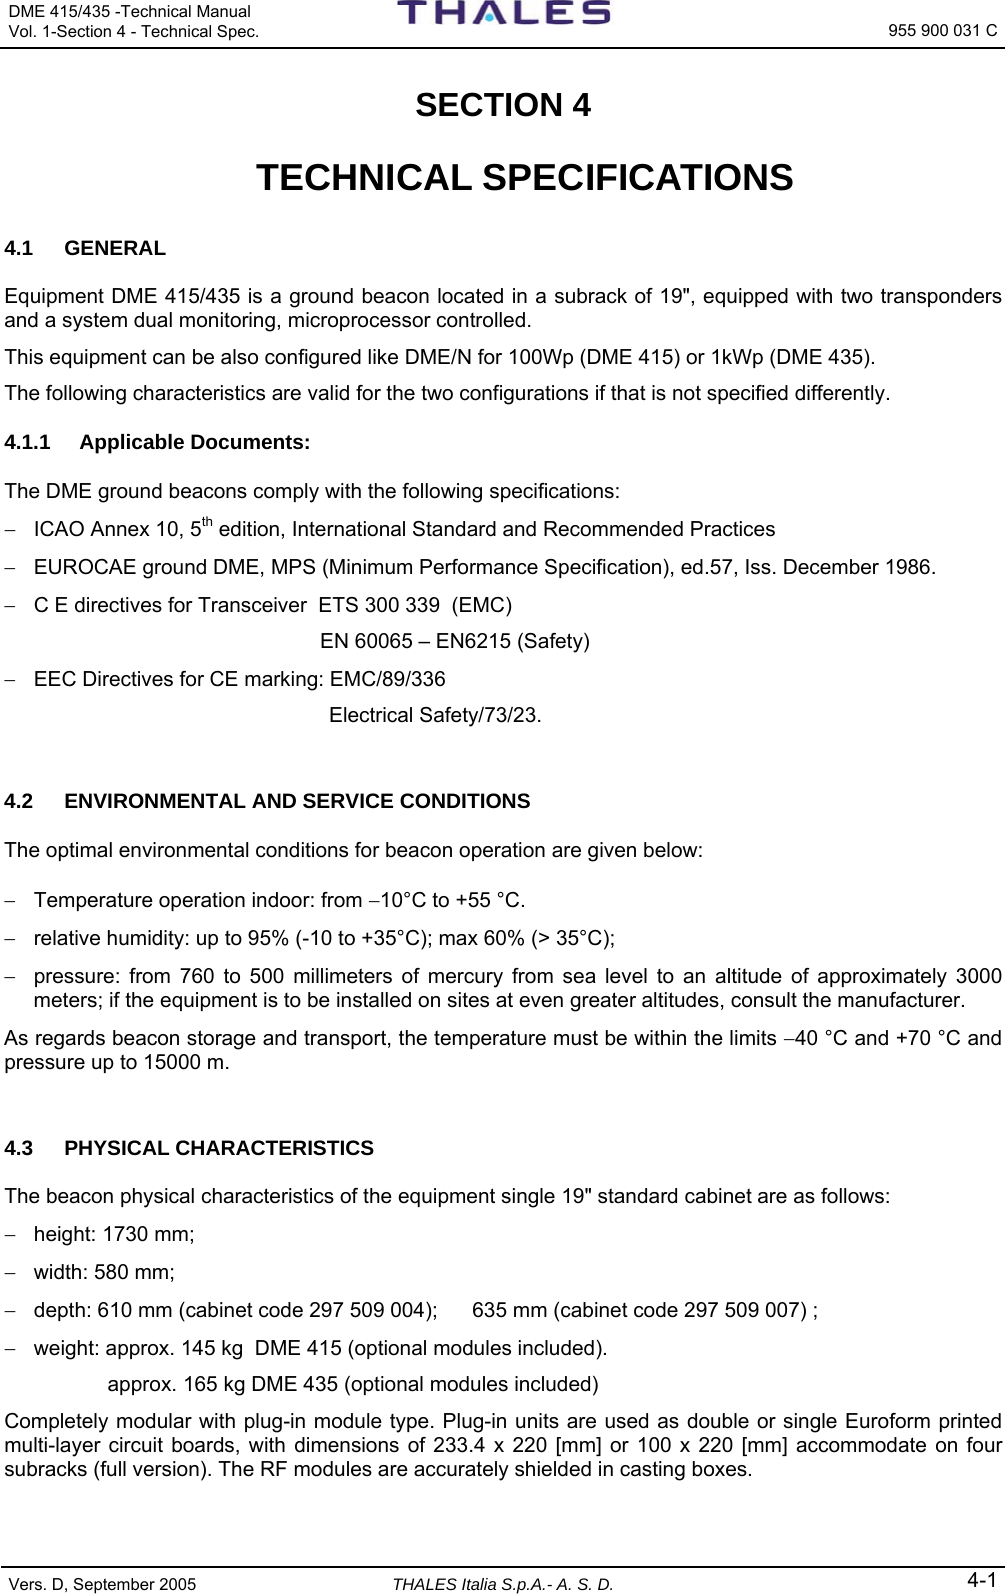 DME 415/435 -Technical Manual  Vol. 1-Section 4 - Technical Spec.   955 900 031 C Vers. D, September 2005 THALES Italia S.p.A.- A. S. D. 4-1 SECTION 4   TECHNICAL SPECIFICATIONS 4.1 GENERAL Equipment DME 415/435 is a ground beacon located in a subrack of 19&quot;, equipped with two transponders and a system dual monitoring, microprocessor controlled.  This equipment can be also configured like DME/N for 100Wp (DME 415) or 1kWp (DME 435).   The following characteristics are valid for the two configurations if that is not specified differently. 4.1.1 Applicable Documents: The DME ground beacons comply with the following specifications: −  ICAO Annex 10, 5th edition, International Standard and Recommended Practices −  EUROCAE ground DME, MPS (Minimum Performance Specification), ed.57, Iss. December 1986. −  C E directives for Transceiver  ETS 300 339  (EMC)     EN 60065 – EN6215 (Safety) −  EEC Directives for CE marking: EMC/89/336  Electrical Safety/73/23.  4.2  ENVIRONMENTAL AND SERVICE CONDITIONS The optimal environmental conditions for beacon operation are given below: −  Temperature operation indoor: from −10°C to +55 °C. −  relative humidity: up to 95% (-10 to +35°C); max 60% (&gt; 35°C); −  pressure: from 760 to 500 millimeters of mercury from sea level to an altitude of approximately 3000 meters; if the equipment is to be installed on sites at even greater altitudes, consult the manufacturer. As regards beacon storage and transport, the temperature must be within the limits −40 °C and +70 °C and pressure up to 15000 m.  4.3 PHYSICAL CHARACTERISTICS The beacon physical characteristics of the equipment single 19&quot; standard cabinet are as follows: −  height: 1730 mm; −  width: 580 mm; −  depth: 610 mm (cabinet code 297 509 004);      635 mm (cabinet code 297 509 007) ; −  weight: approx. 145 kg  DME 415 (optional modules included). approx. 165 kg DME 435 (optional modules included) Completely modular with plug-in module type. Plug-in units are used as double or single Euroform printed multi-layer circuit boards, with dimensions of 233.4 x 220 [mm] or 100 x 220 [mm] accommodate on four subracks (full version). The RF modules are accurately shielded in casting boxes.  